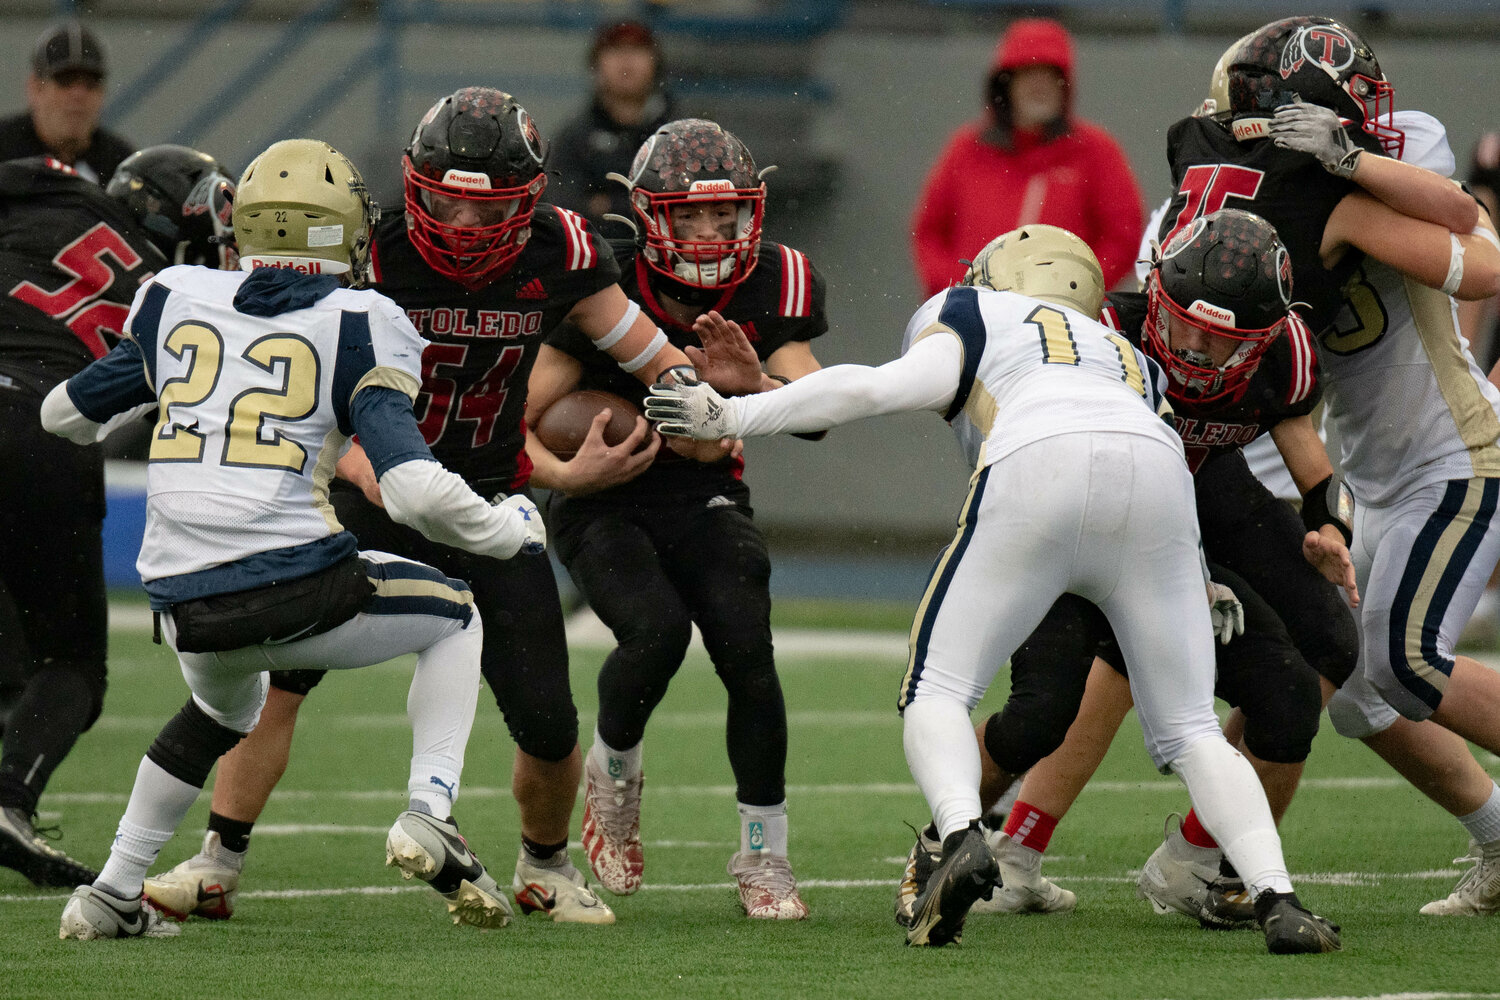 Toledo's Eli Weeks rushes downfield  during a 21-12 win over Tri Cities Prep Nov. 11.